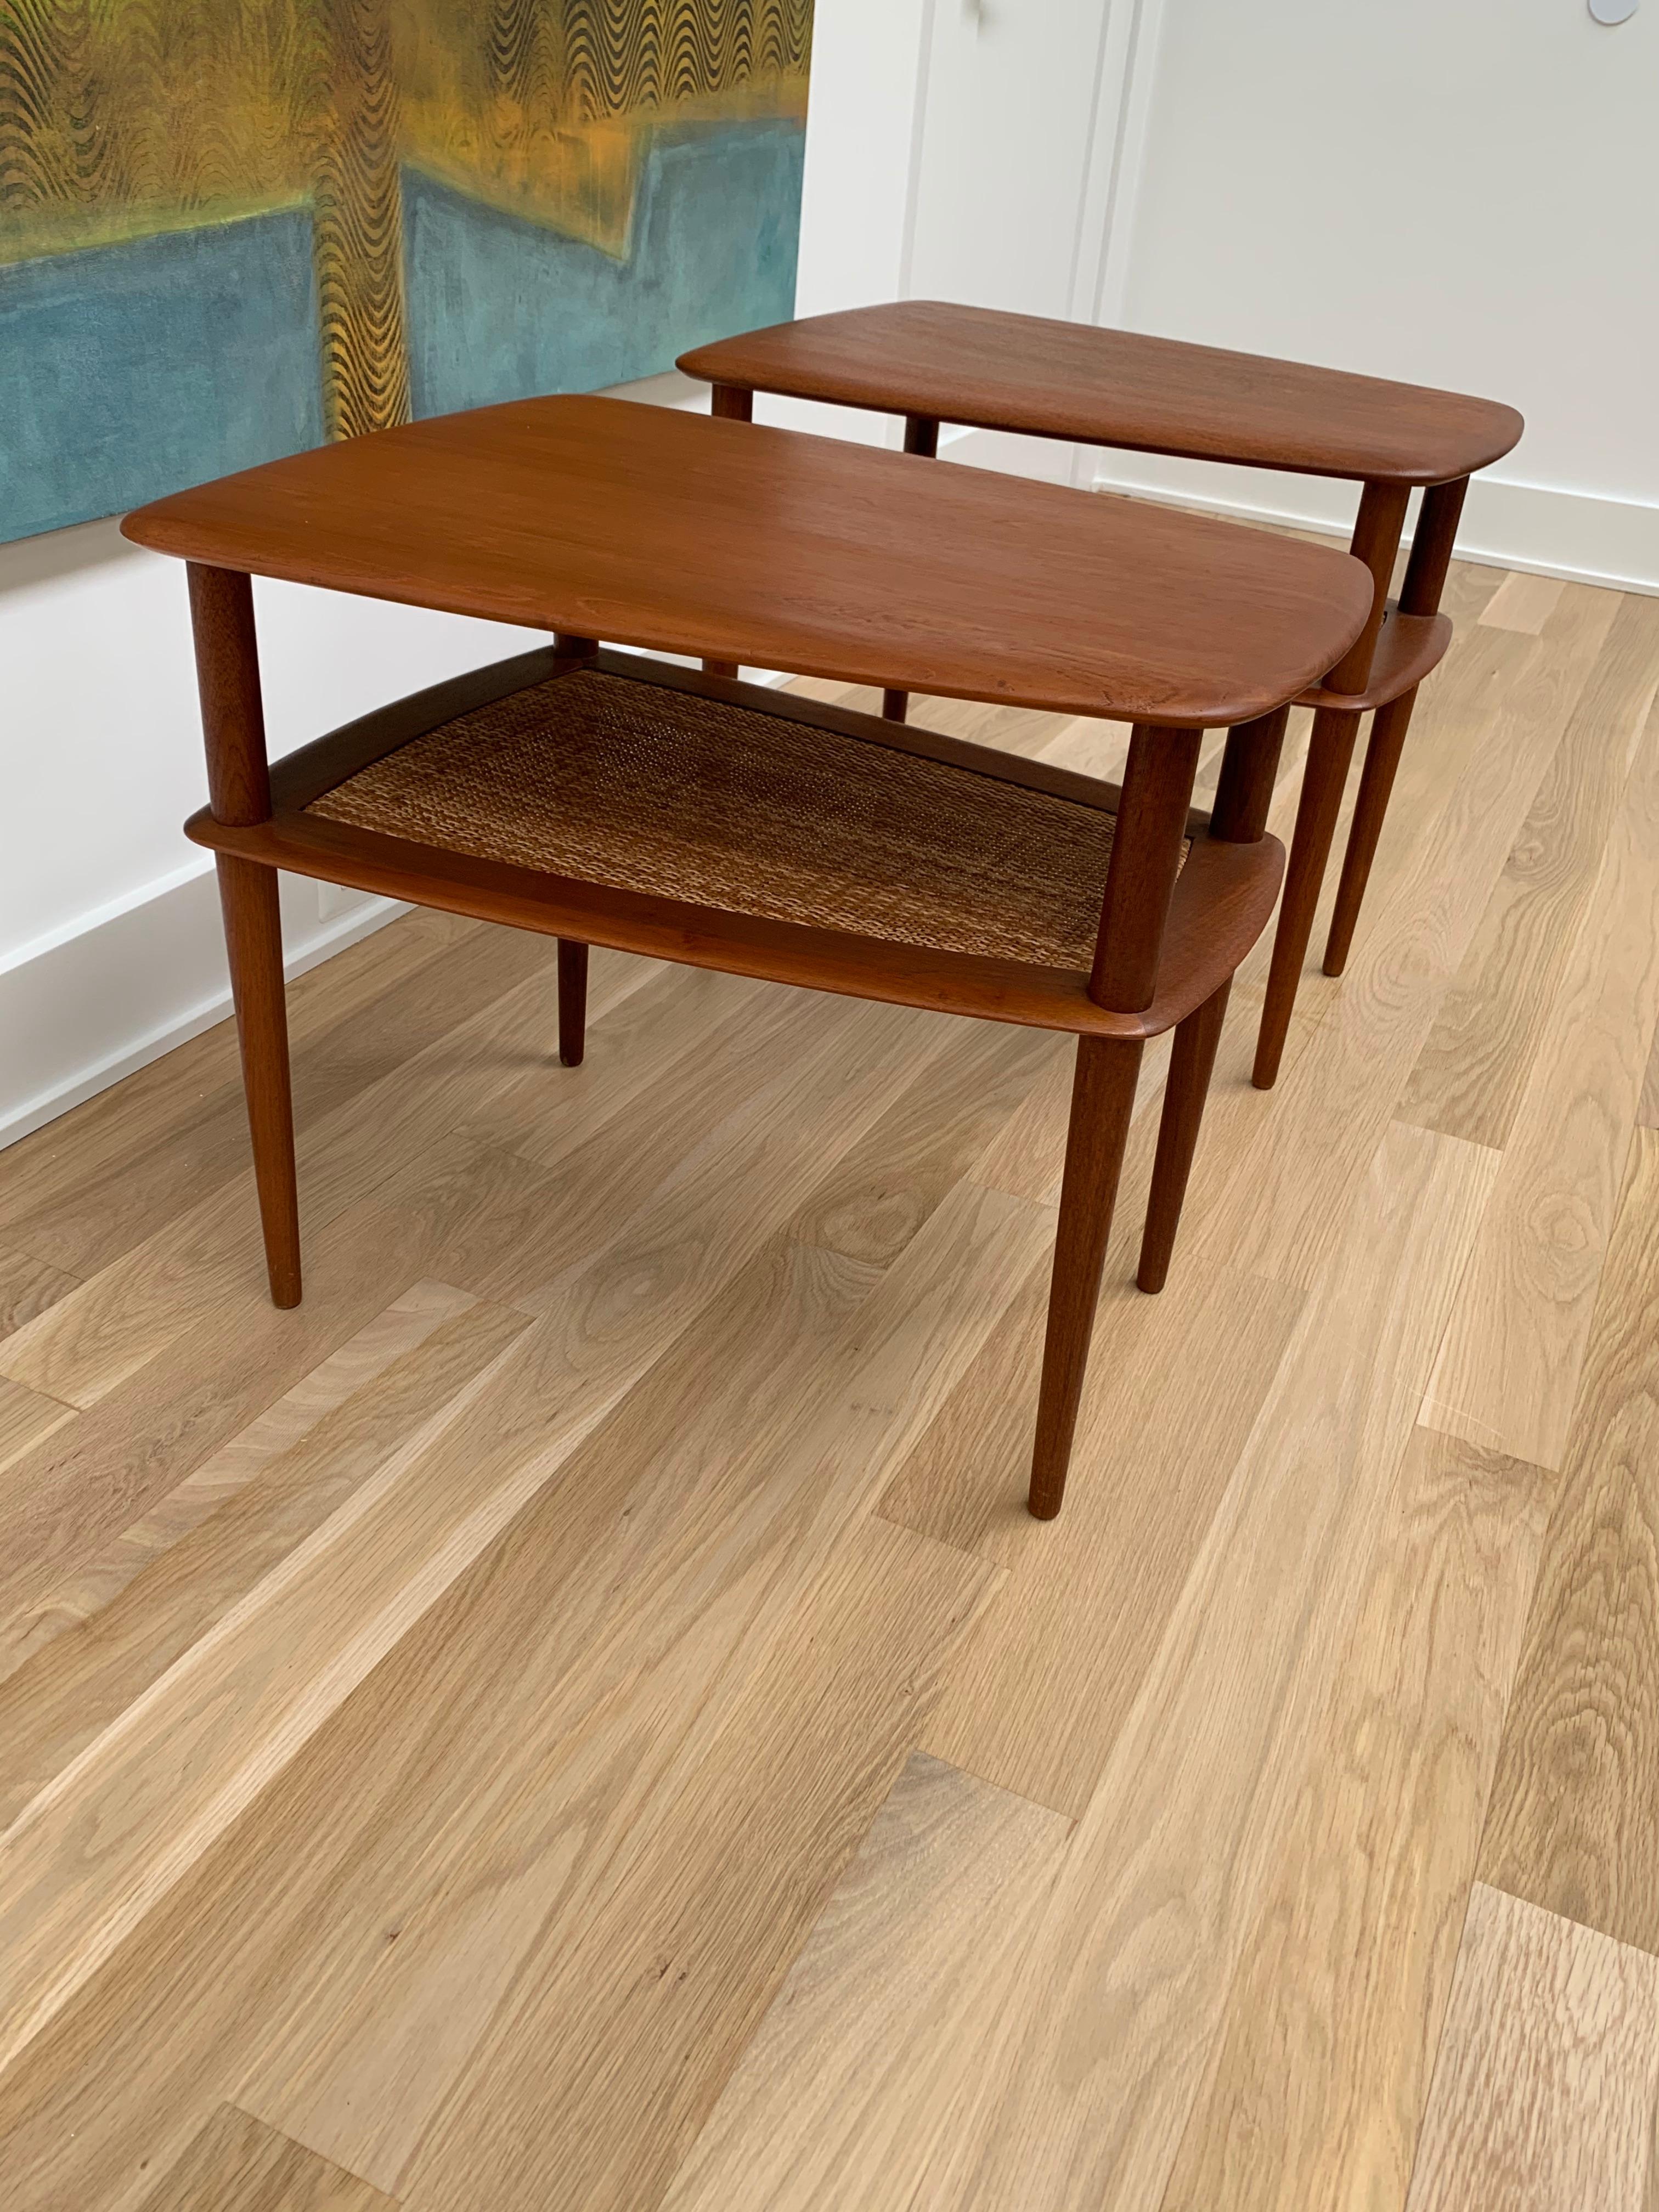 Pair of Peter Hvidt Teak Side Tables In Good Condition For Sale In Washington, DC